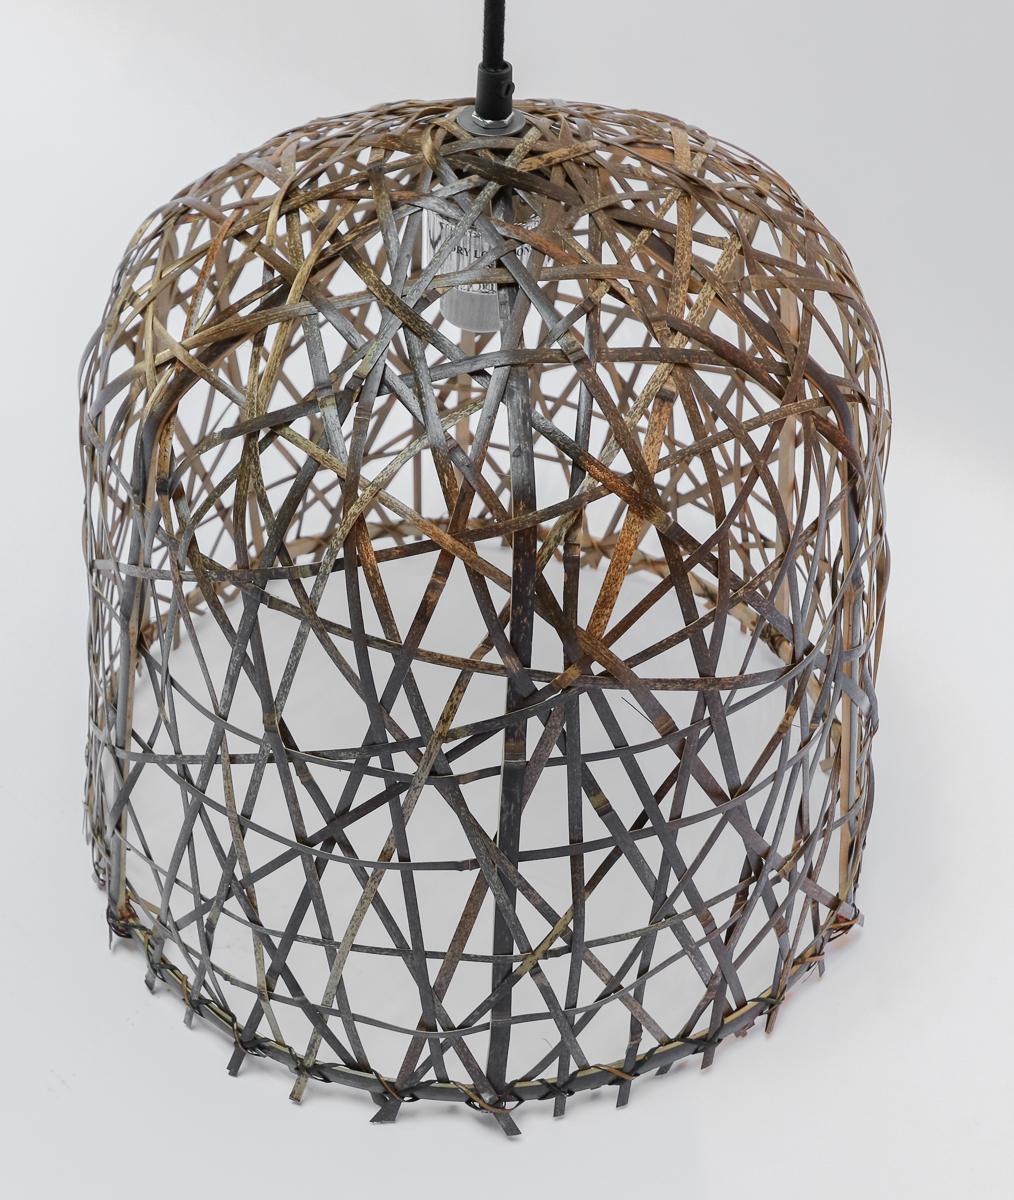 The inverted-cup shape of the Black Bird’s Nest small pendant has a shade woven from repurposed bamboo strips. It is the creation of Ay Illuminate, a company that has garnered quite a reputation for using this material as a building block for its